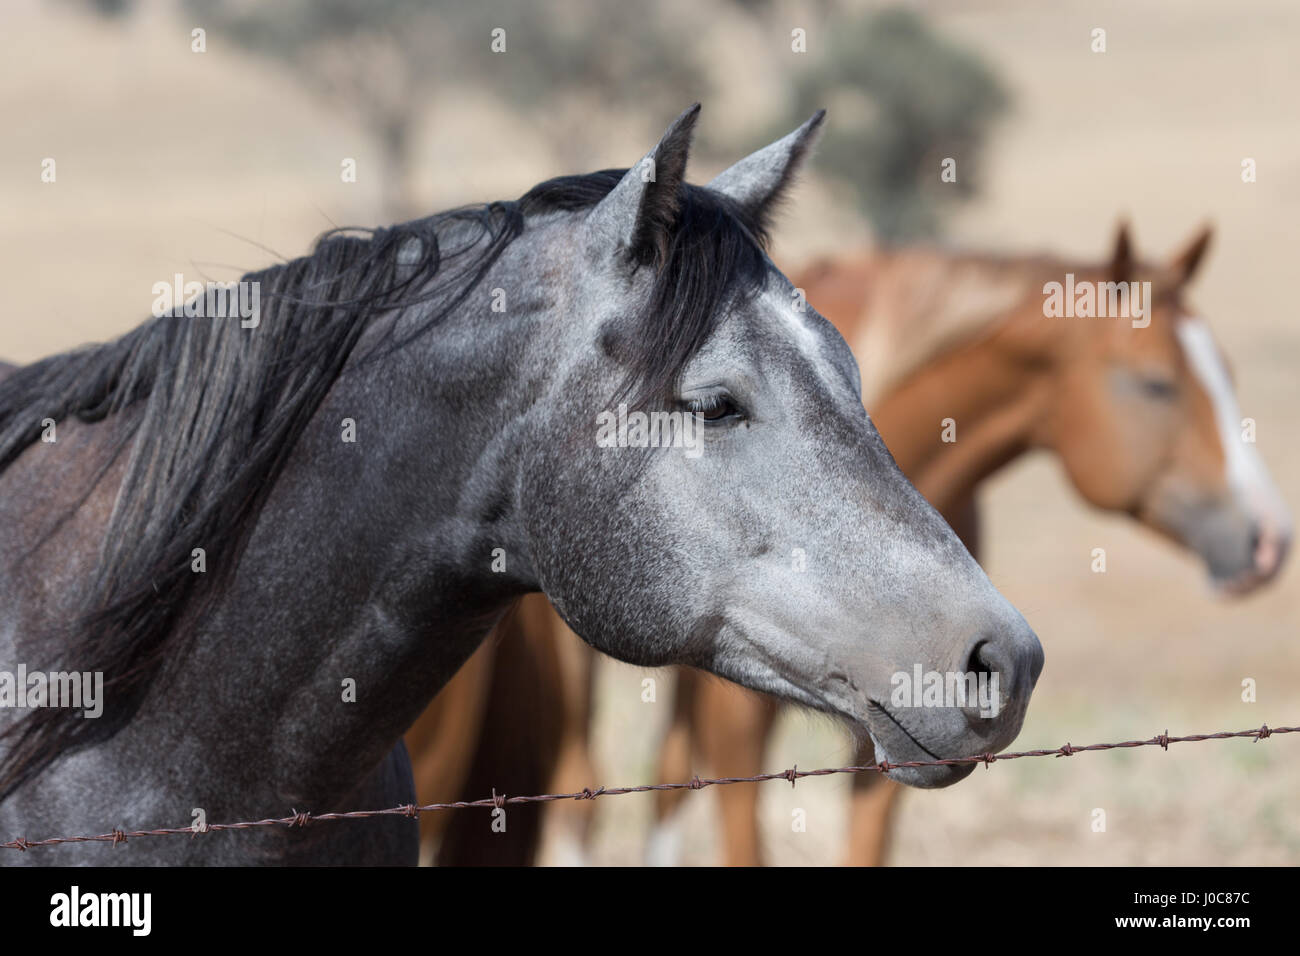 A photograph of a beautiful black and grey horse behind a barbed wire fence on farm in Central Western NSW, Australia. Stock Photo